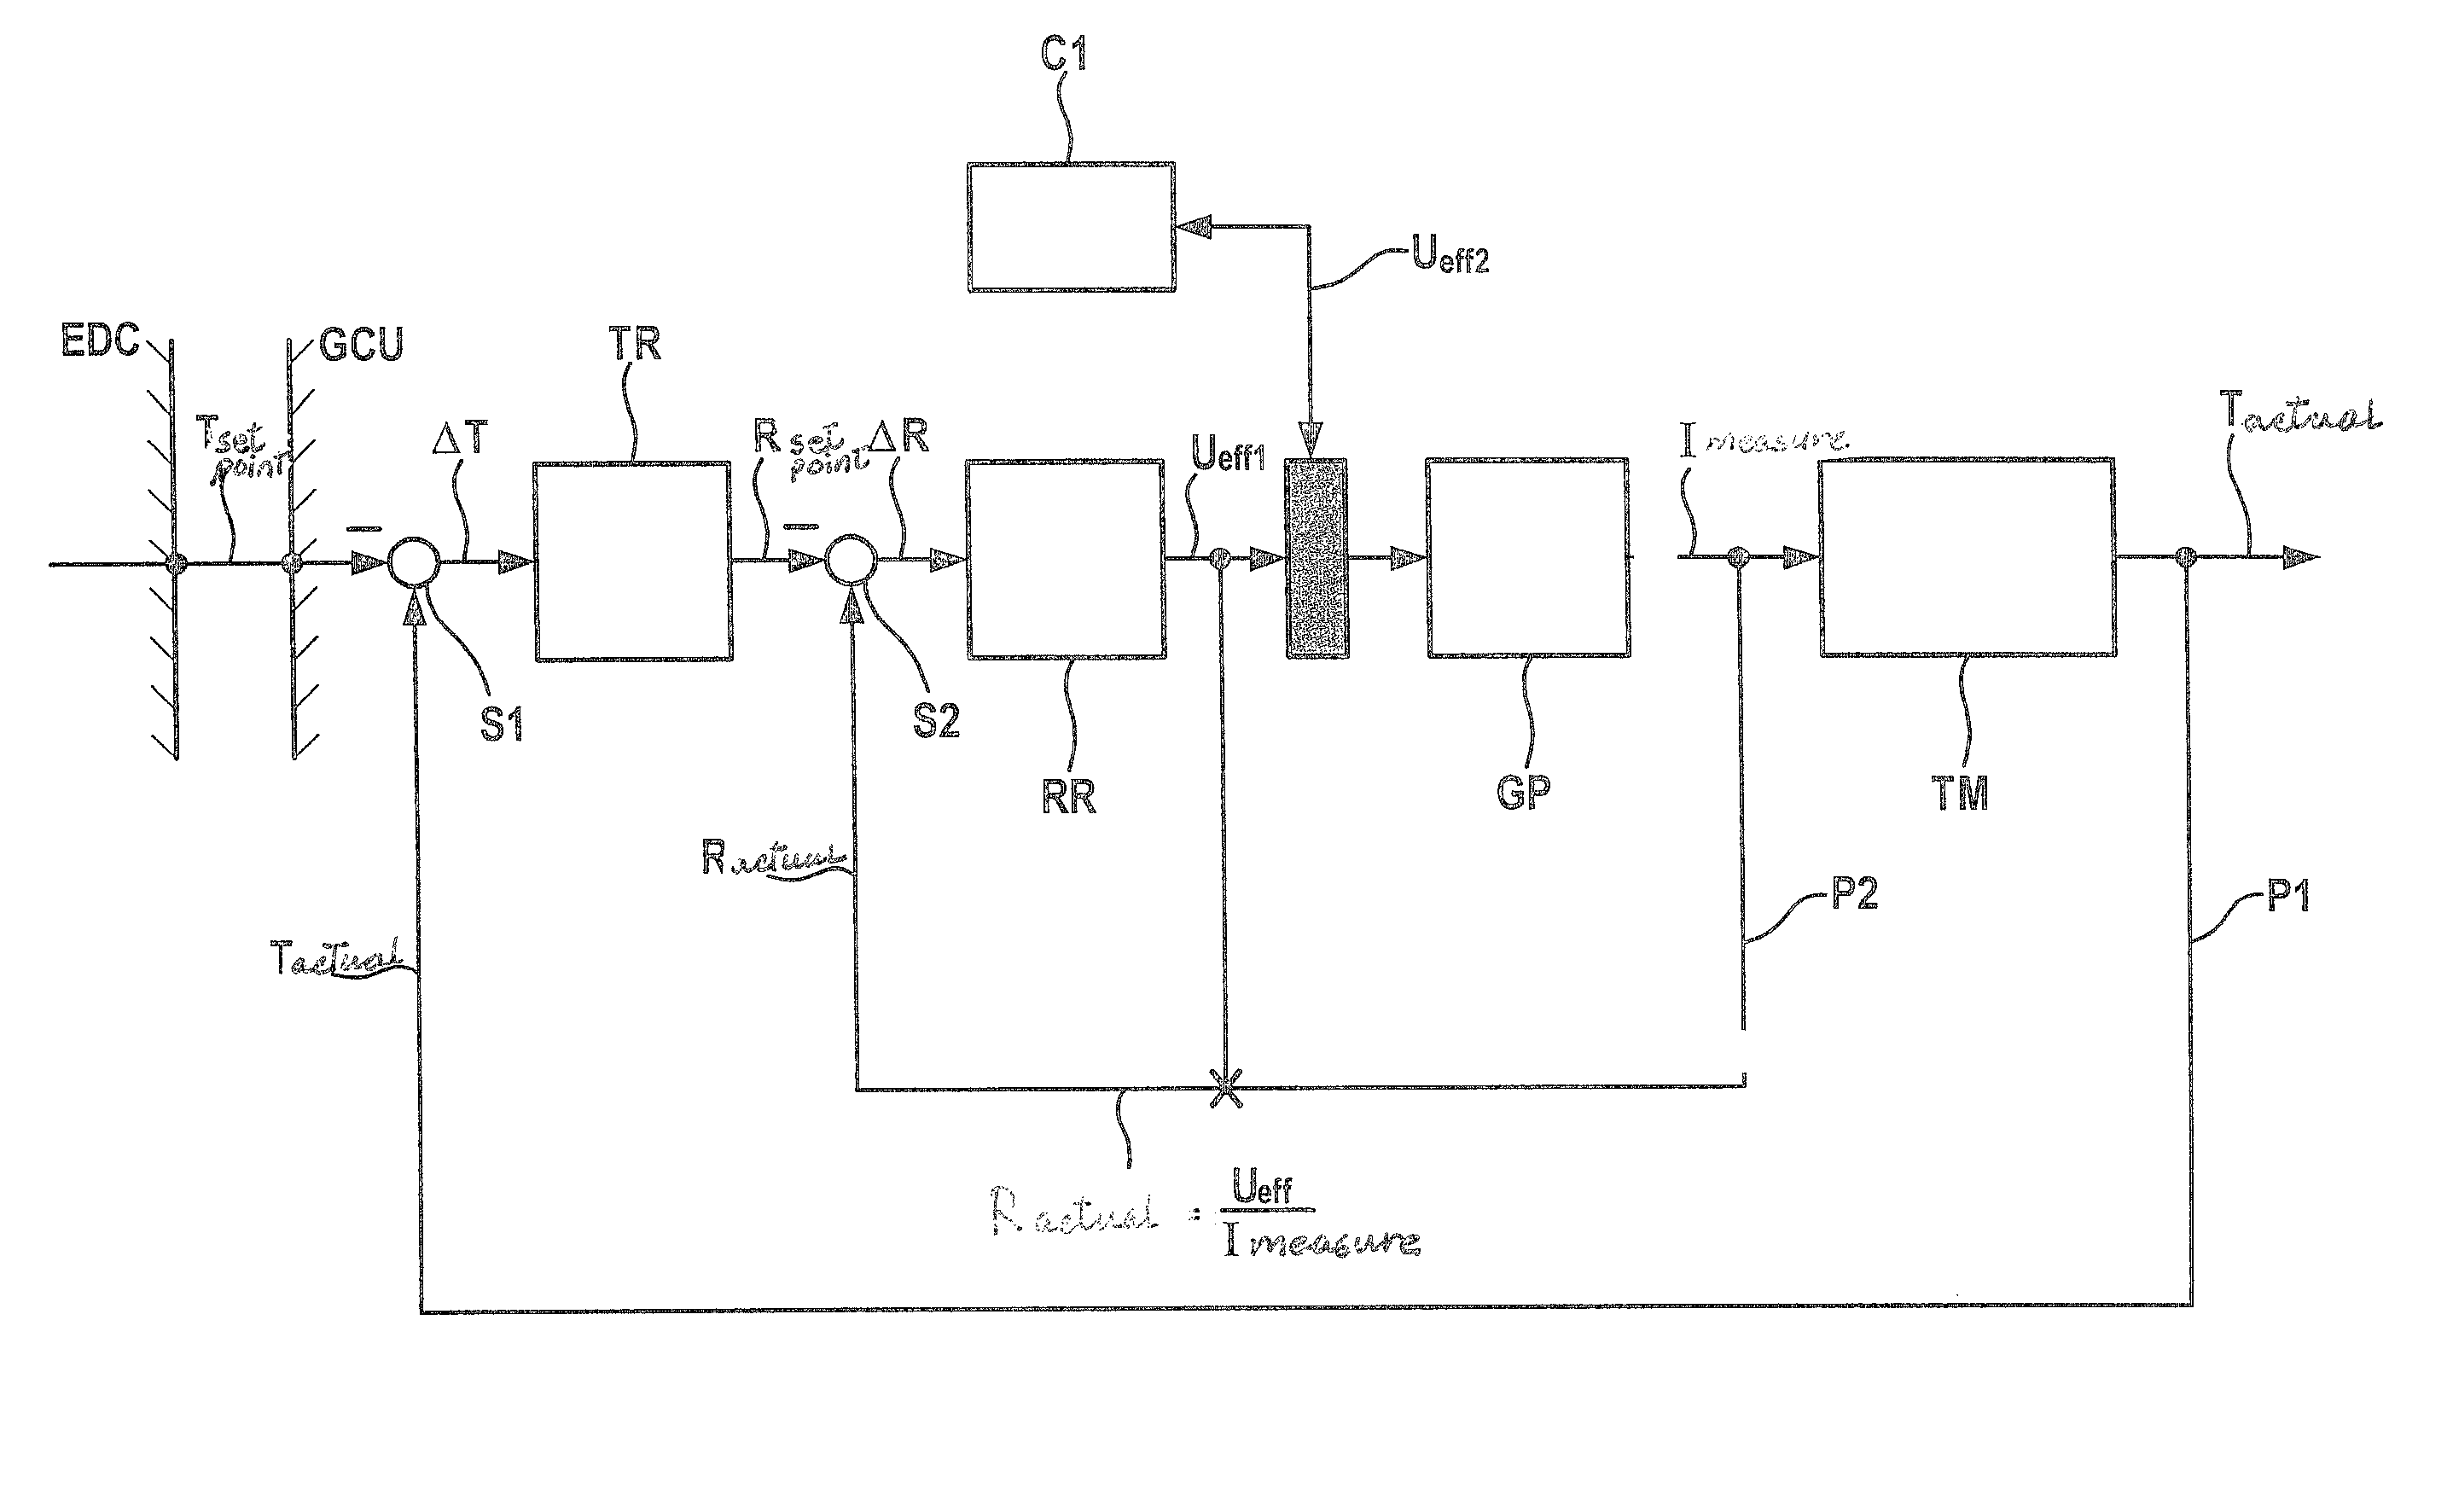 Method for controlling at least one sheathed-element glow plug in an internal combustion engine and engine controller